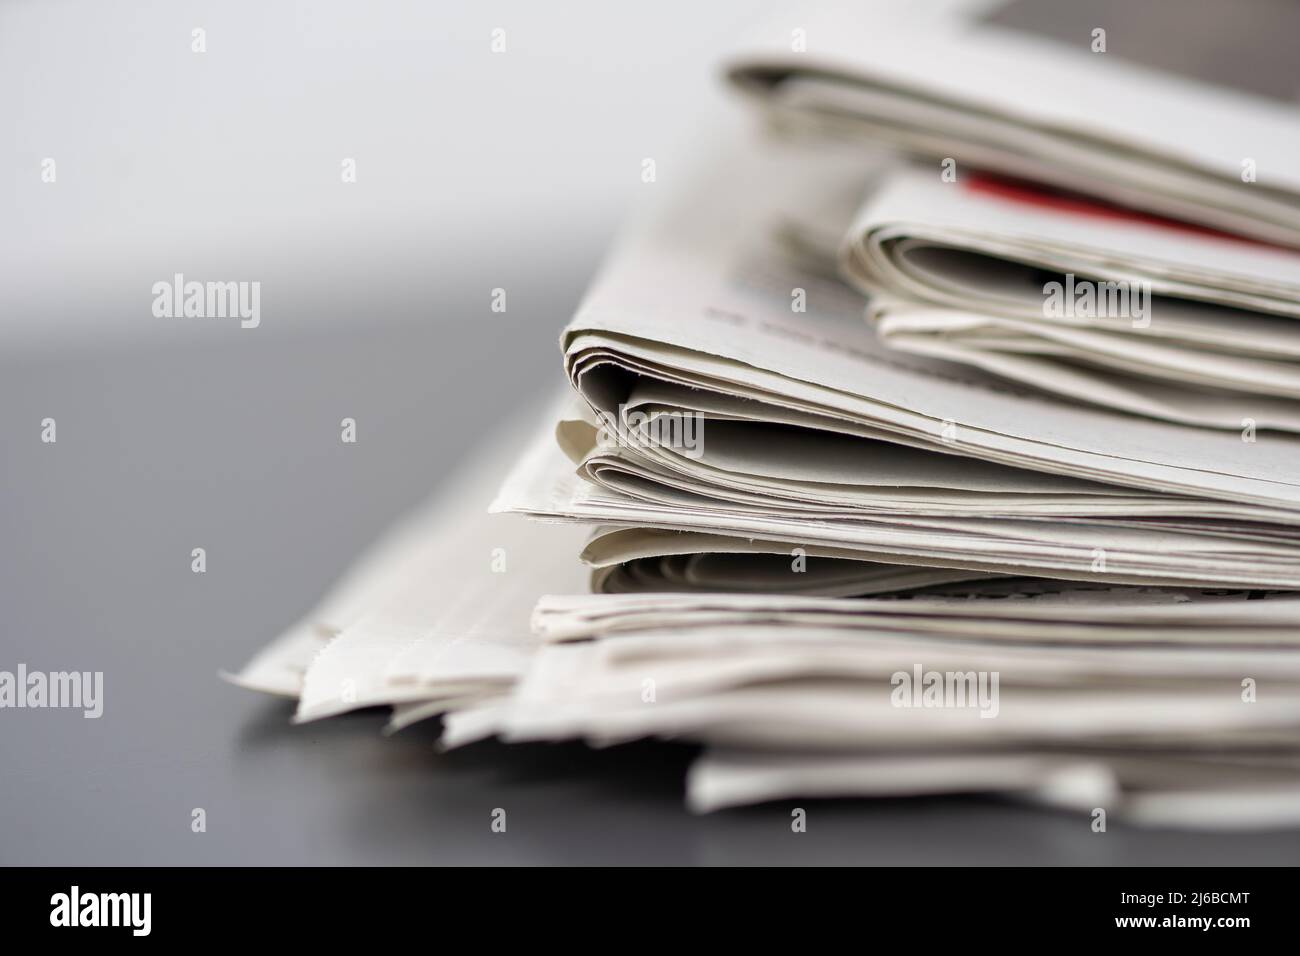 Macro shot of a stack of newspapers. The newspapers are folded and the articles are not legible Stock Photo